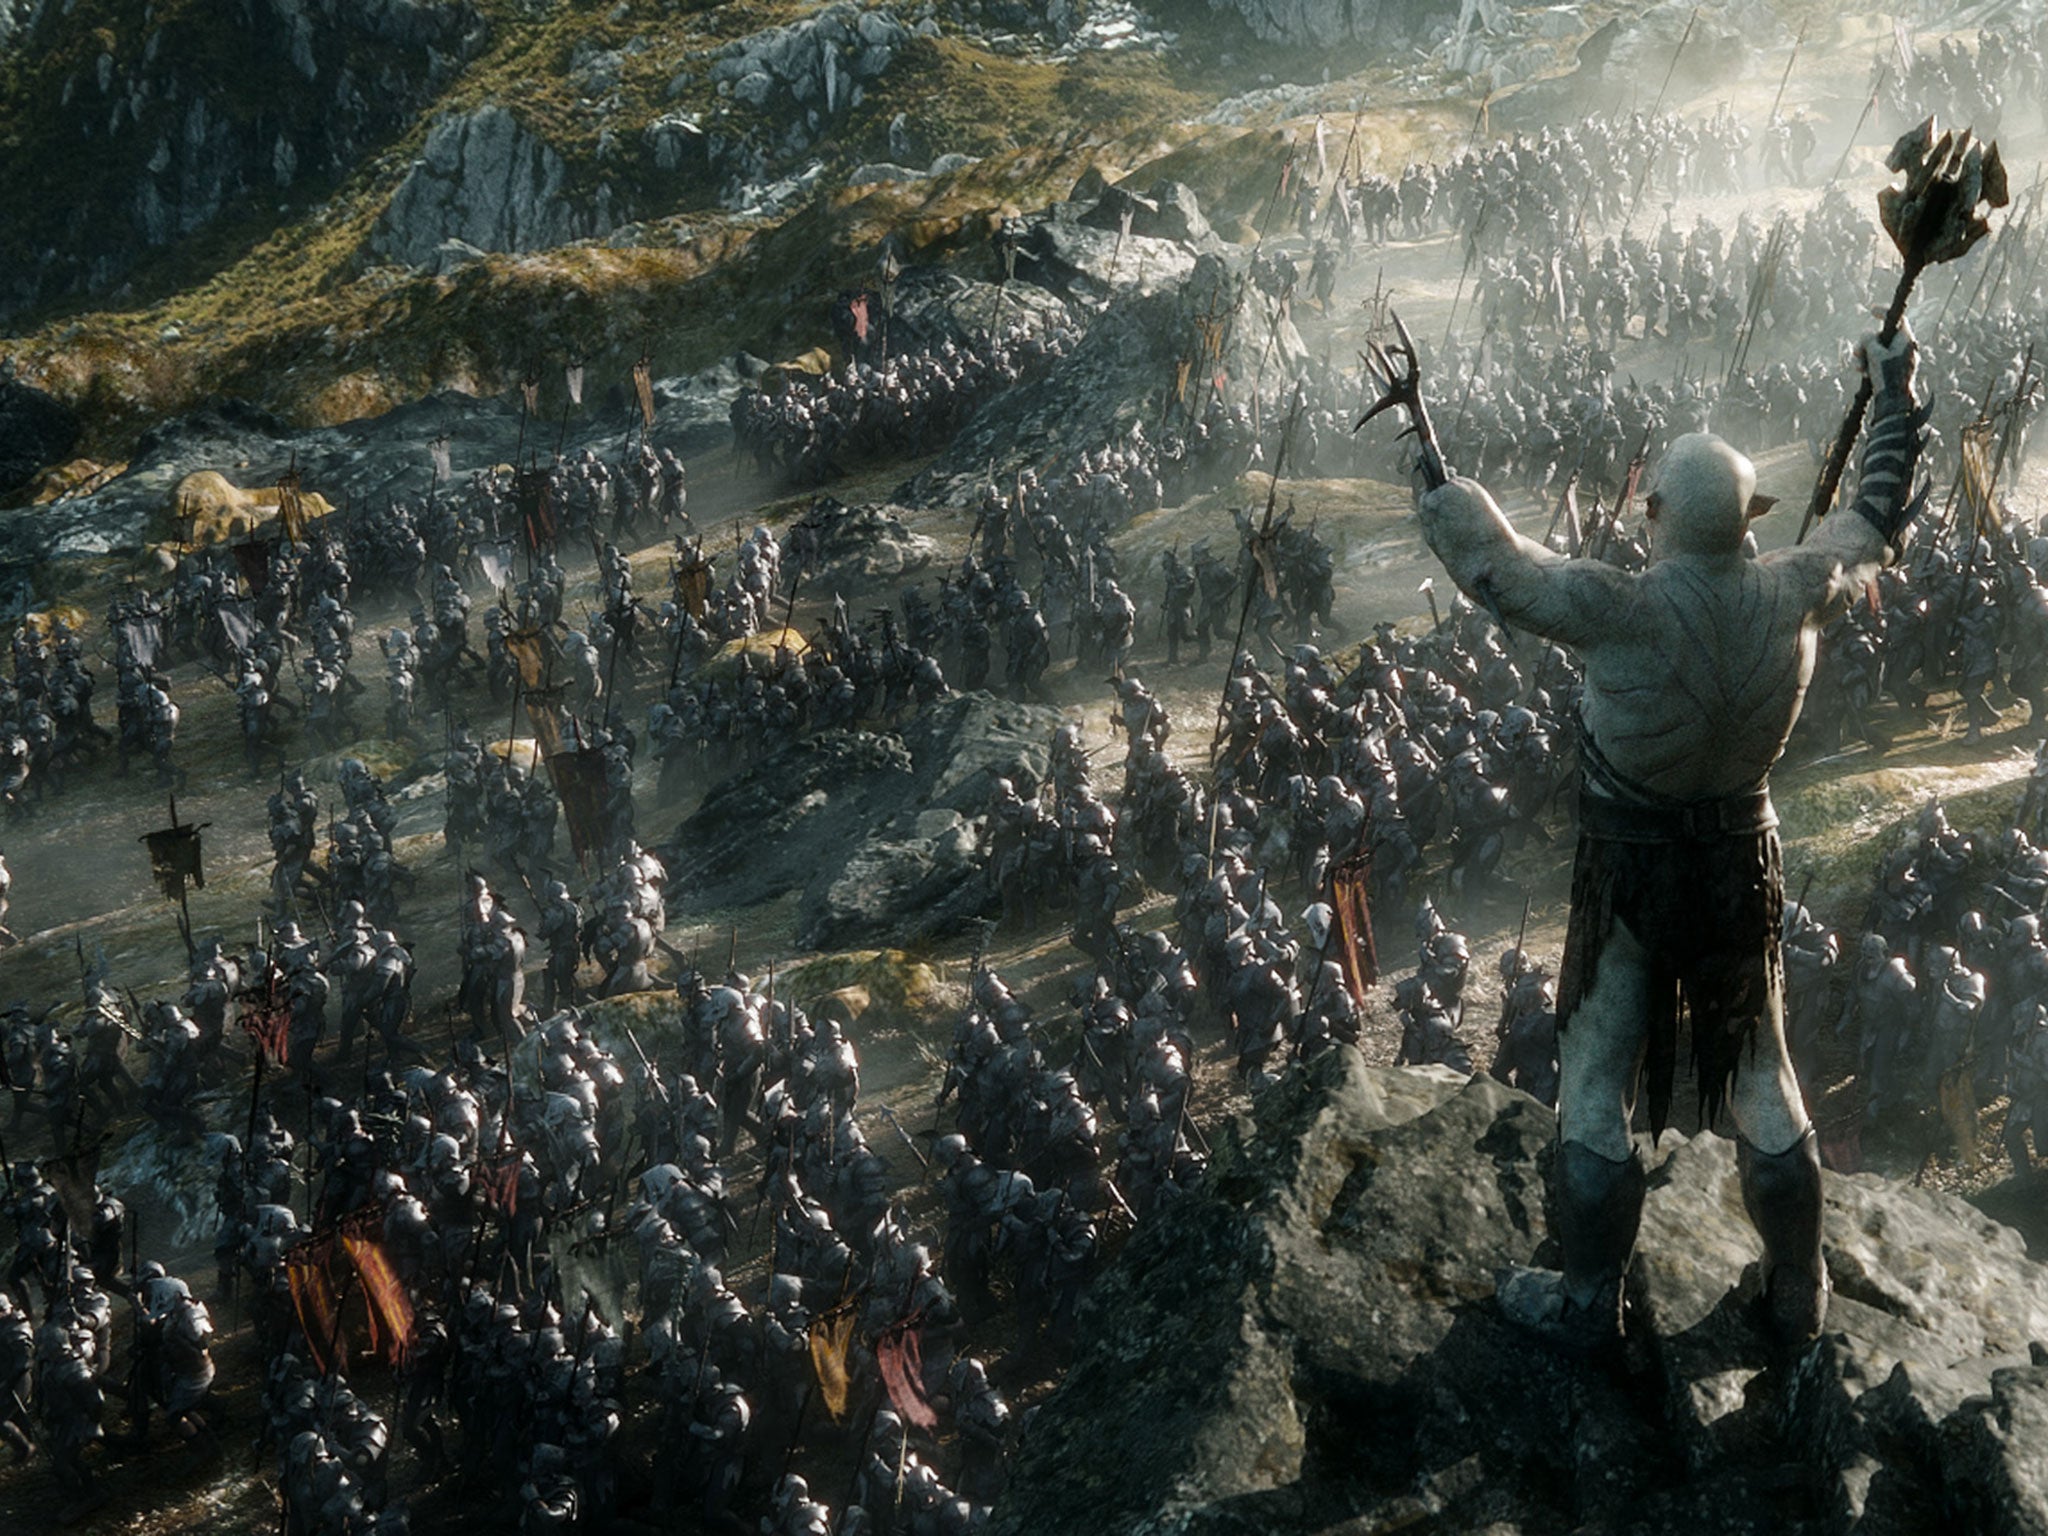 The Hobbit: The Battle of the Five Armies looks set to be a dramatic conclusion to Peter Jackson's trilogy